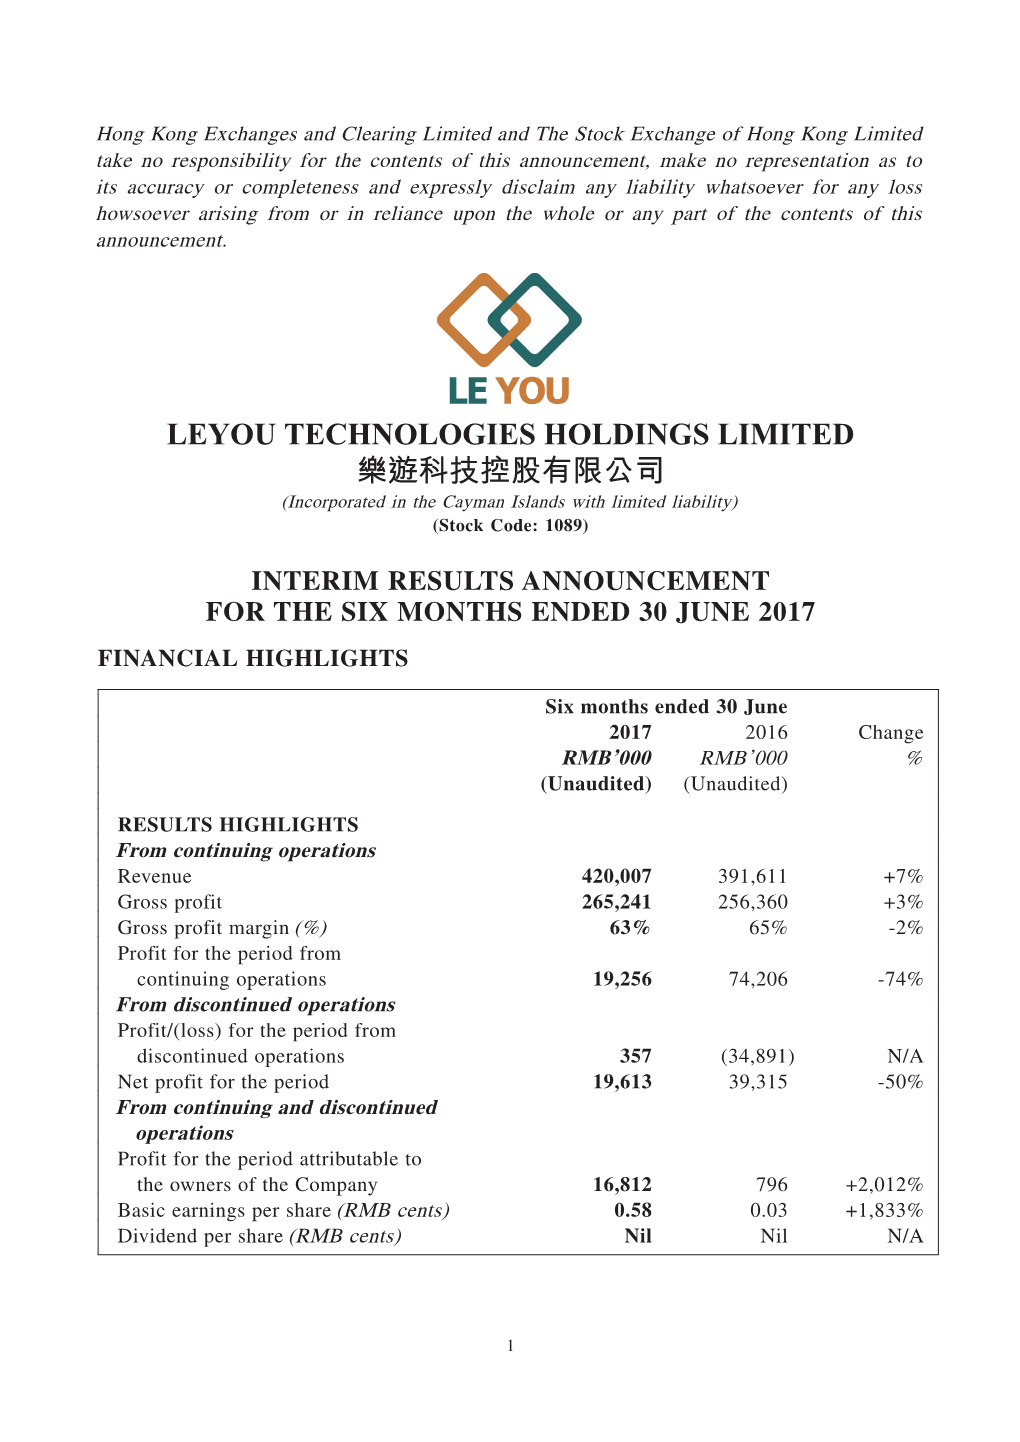 LEYOU TECHNOLOGIES HOLDINGS LIMITED 樂遊科技控股有限公司 (Incorporated in the Cayman Islands with Limited Liability) 6WRFN &RGH 